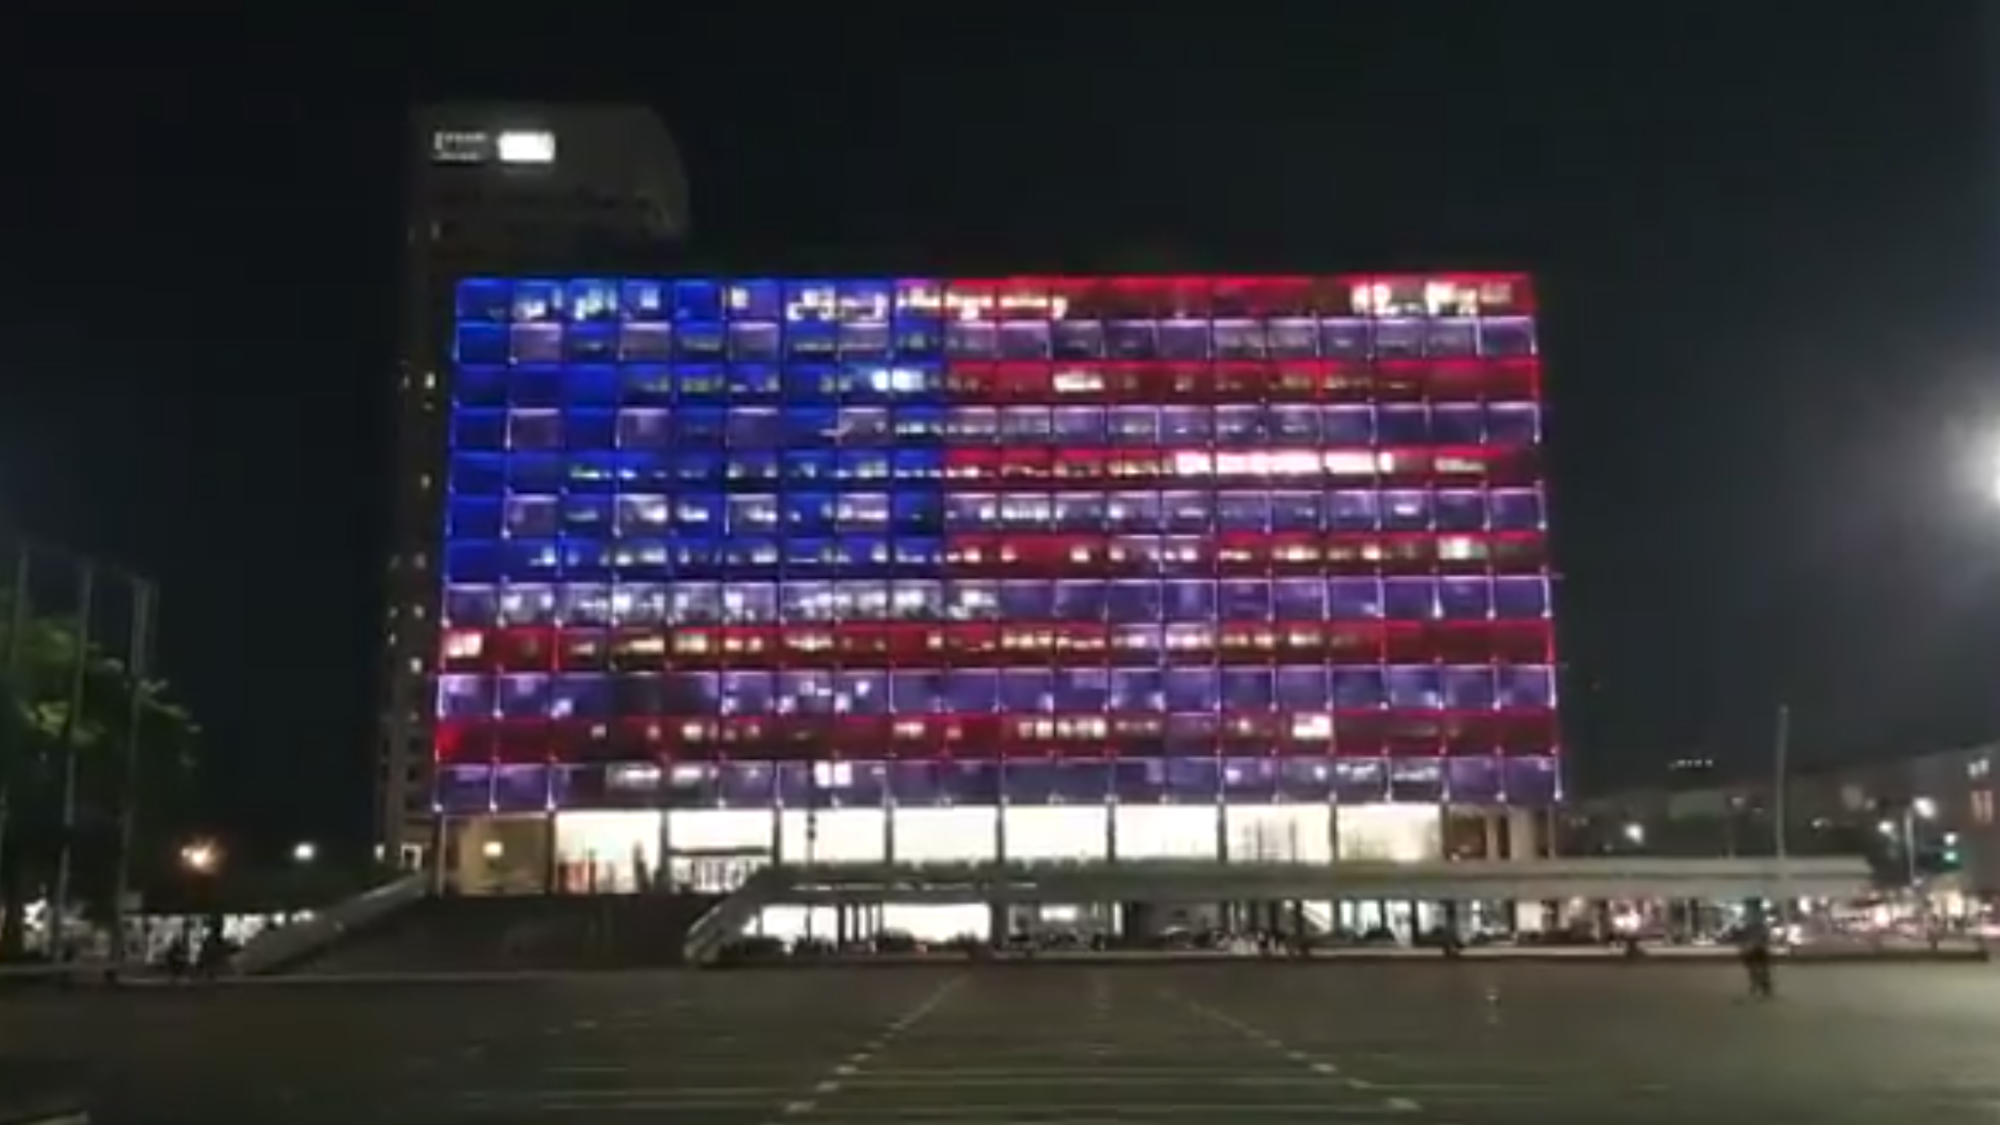 Tel Aviv City Hall lit up in the colors of an American flag. Aug. 4, 2019. Source: Screenshot.